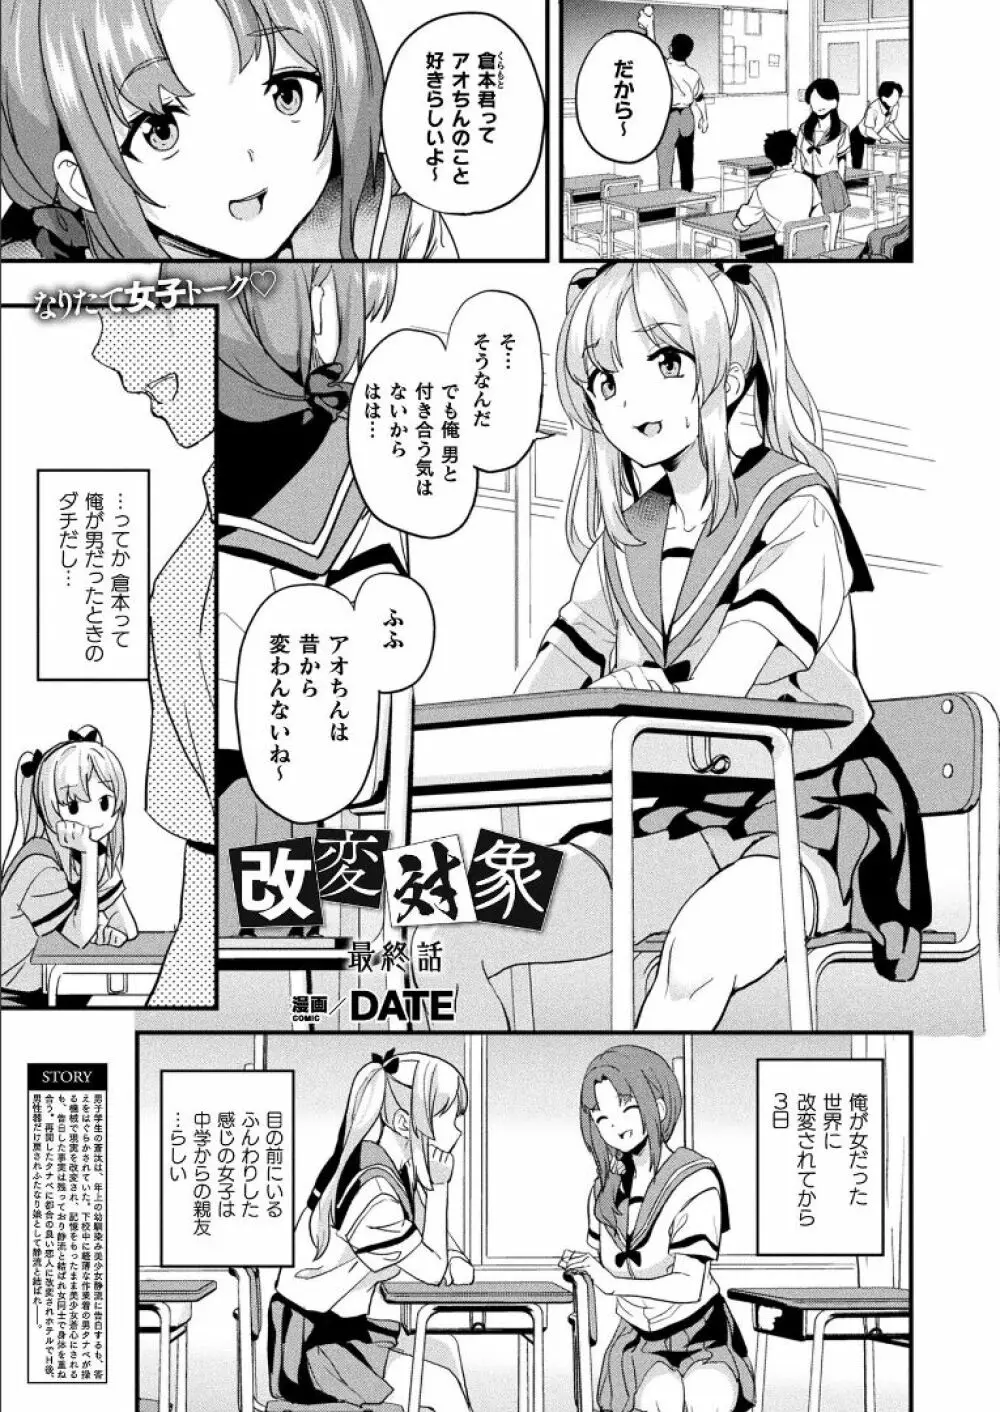 [DATE] 改変対象 第3話 (コミックアンリアル 2021年6月号 Vol.94) RAW Page.1